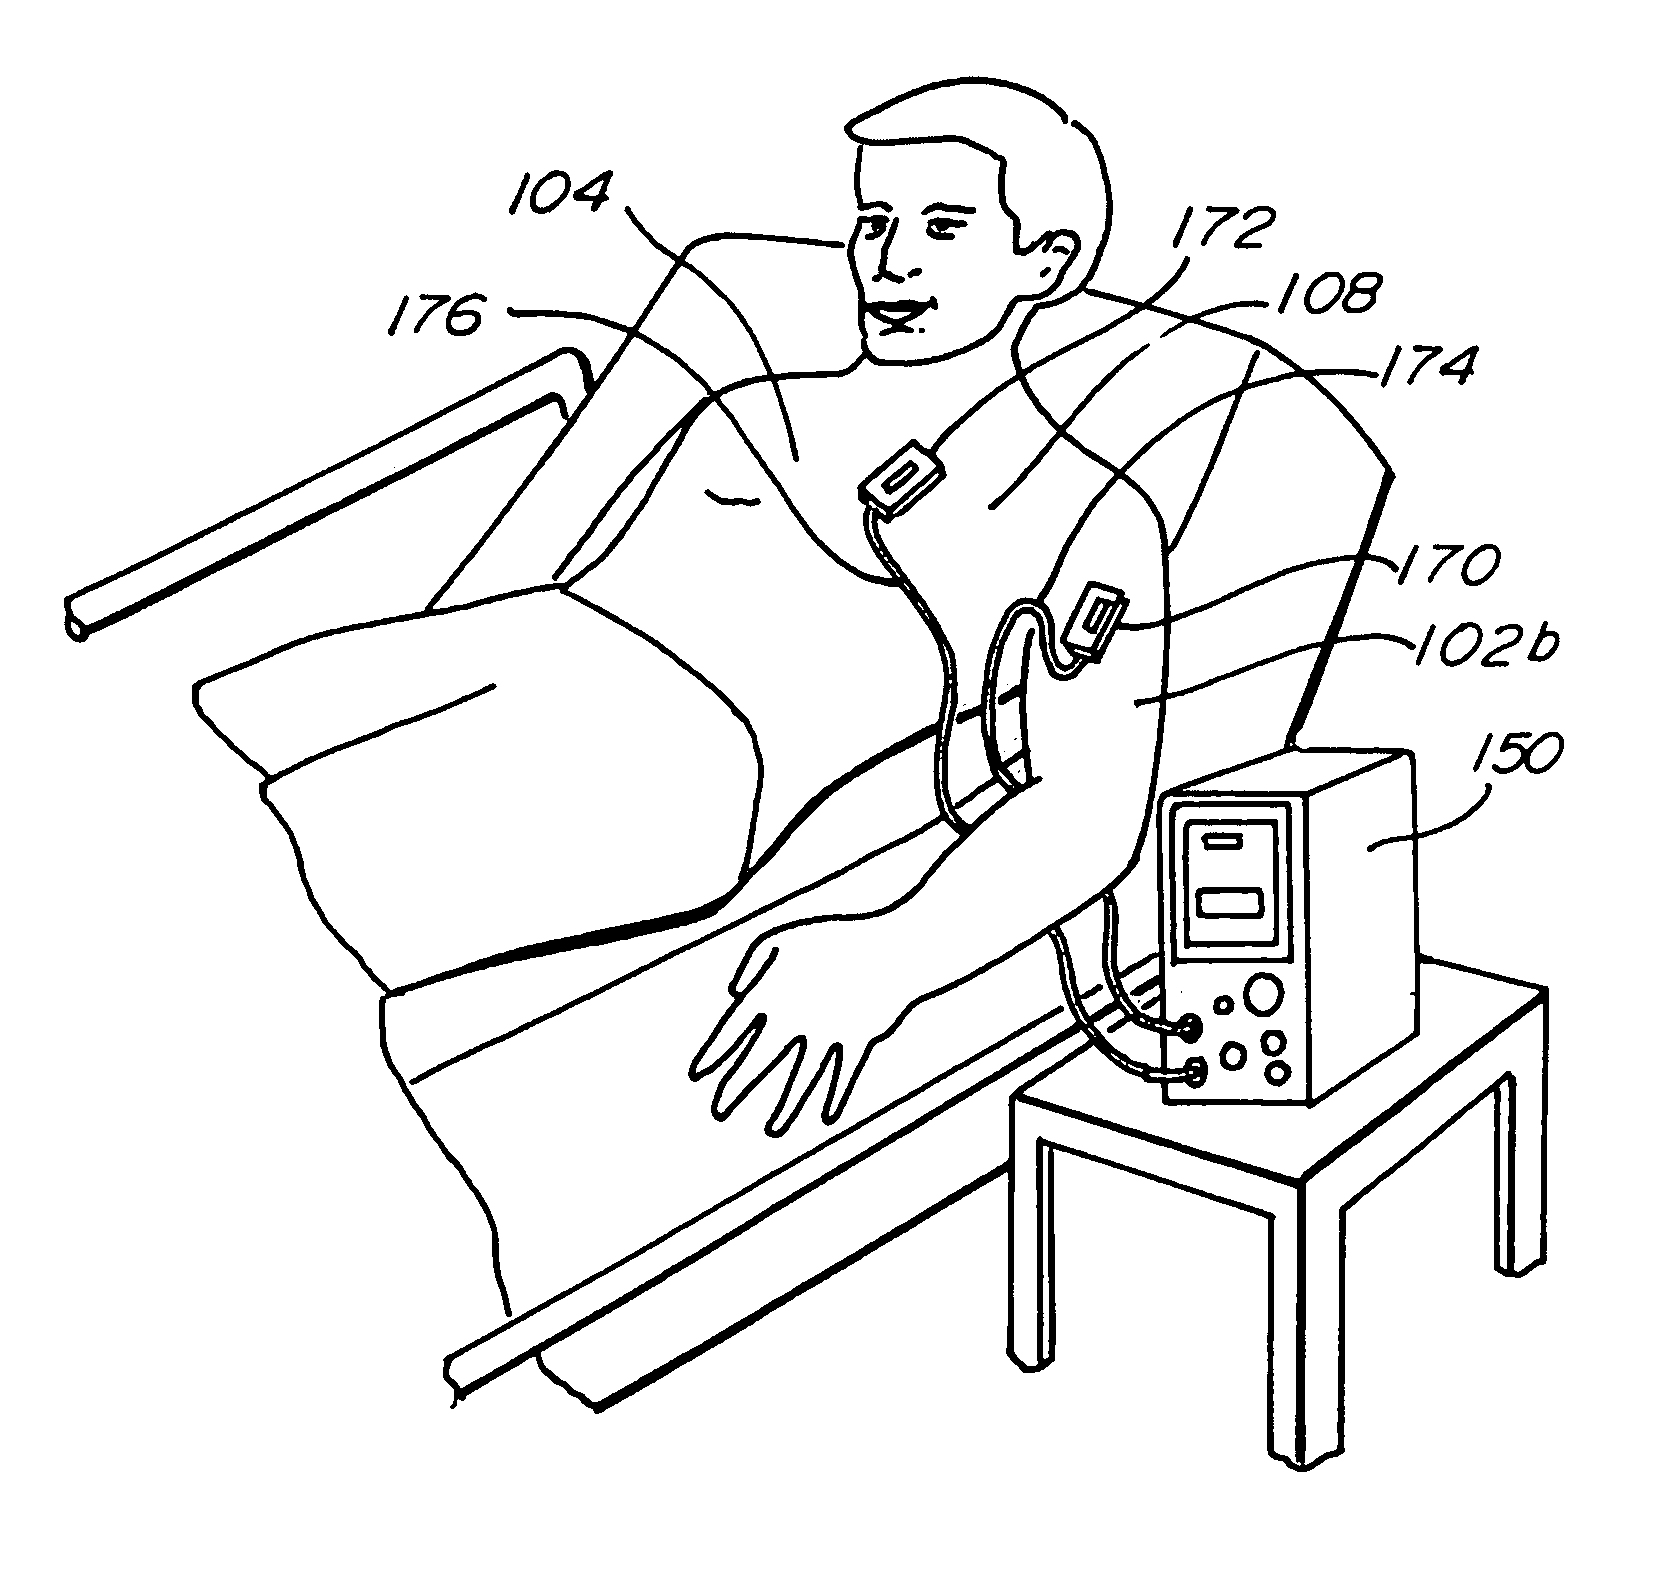 Method of applying electrical signals to a patient and automatic wearable external defibrillator